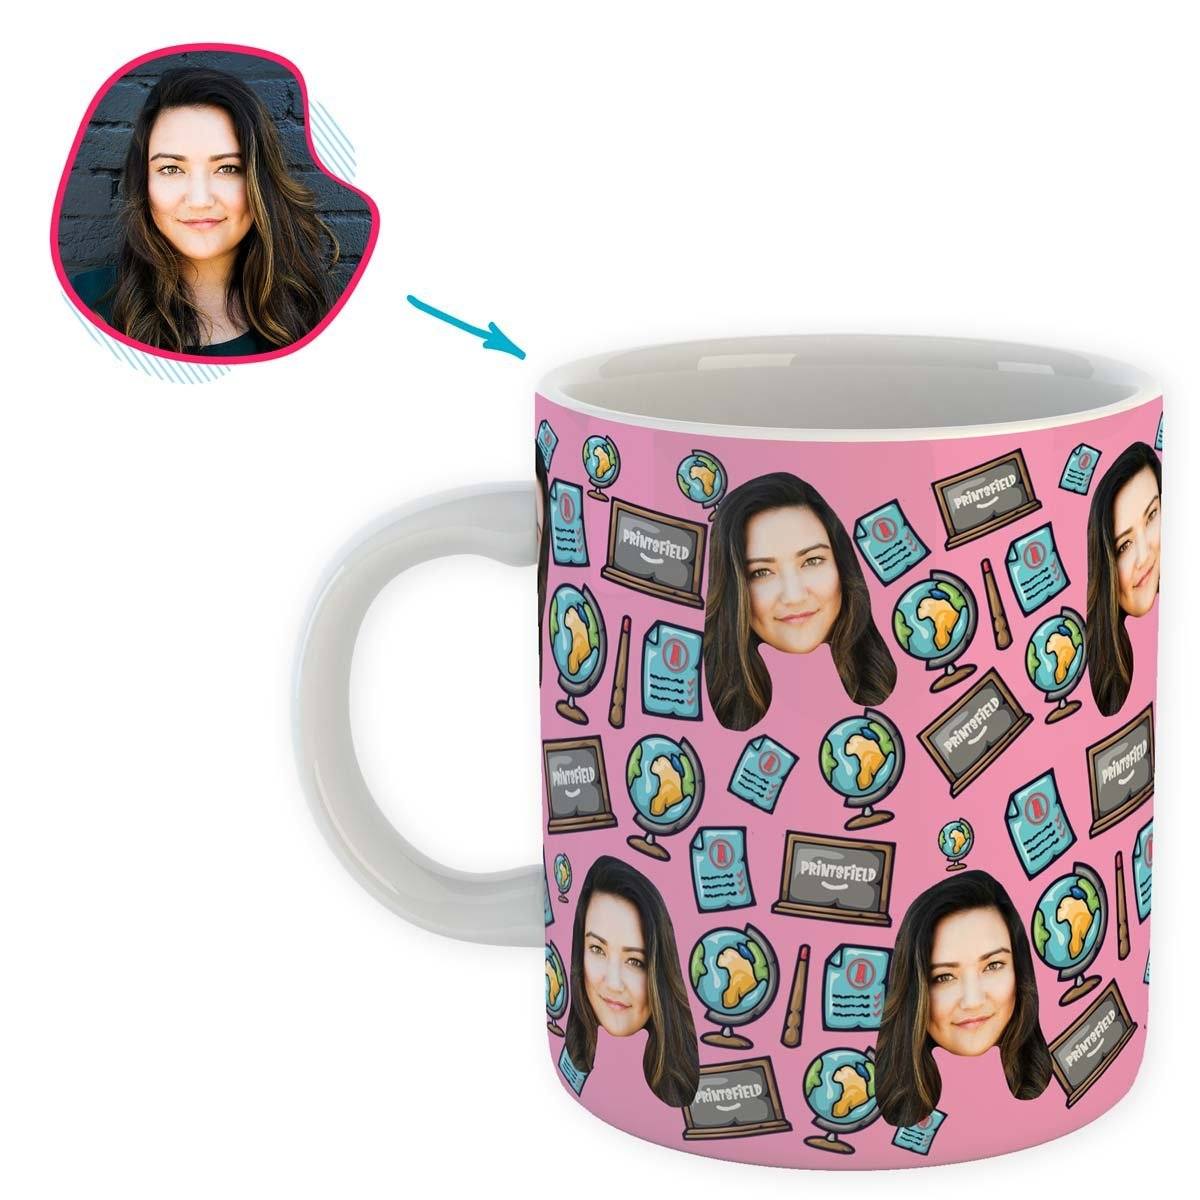 Pink Teacher personalized mug with photo of face printed on it